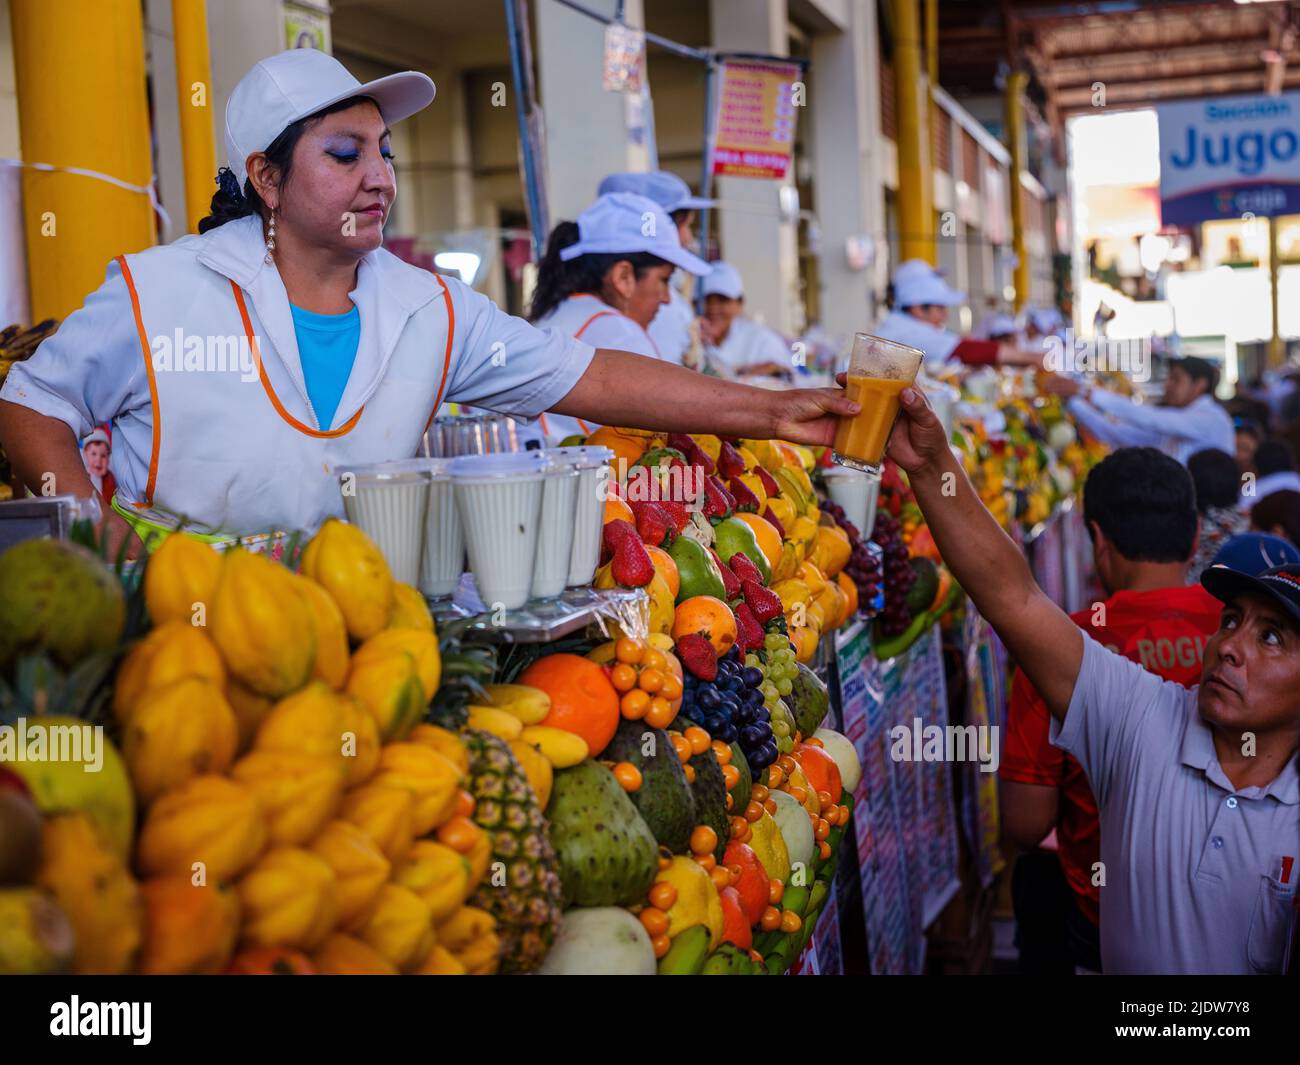 AREQUIPA, PERU - CIRCA SEPTEMBER 2019: Merchant in one of the juice stalls at the San Camilo market in Arequipa. Stock Photo